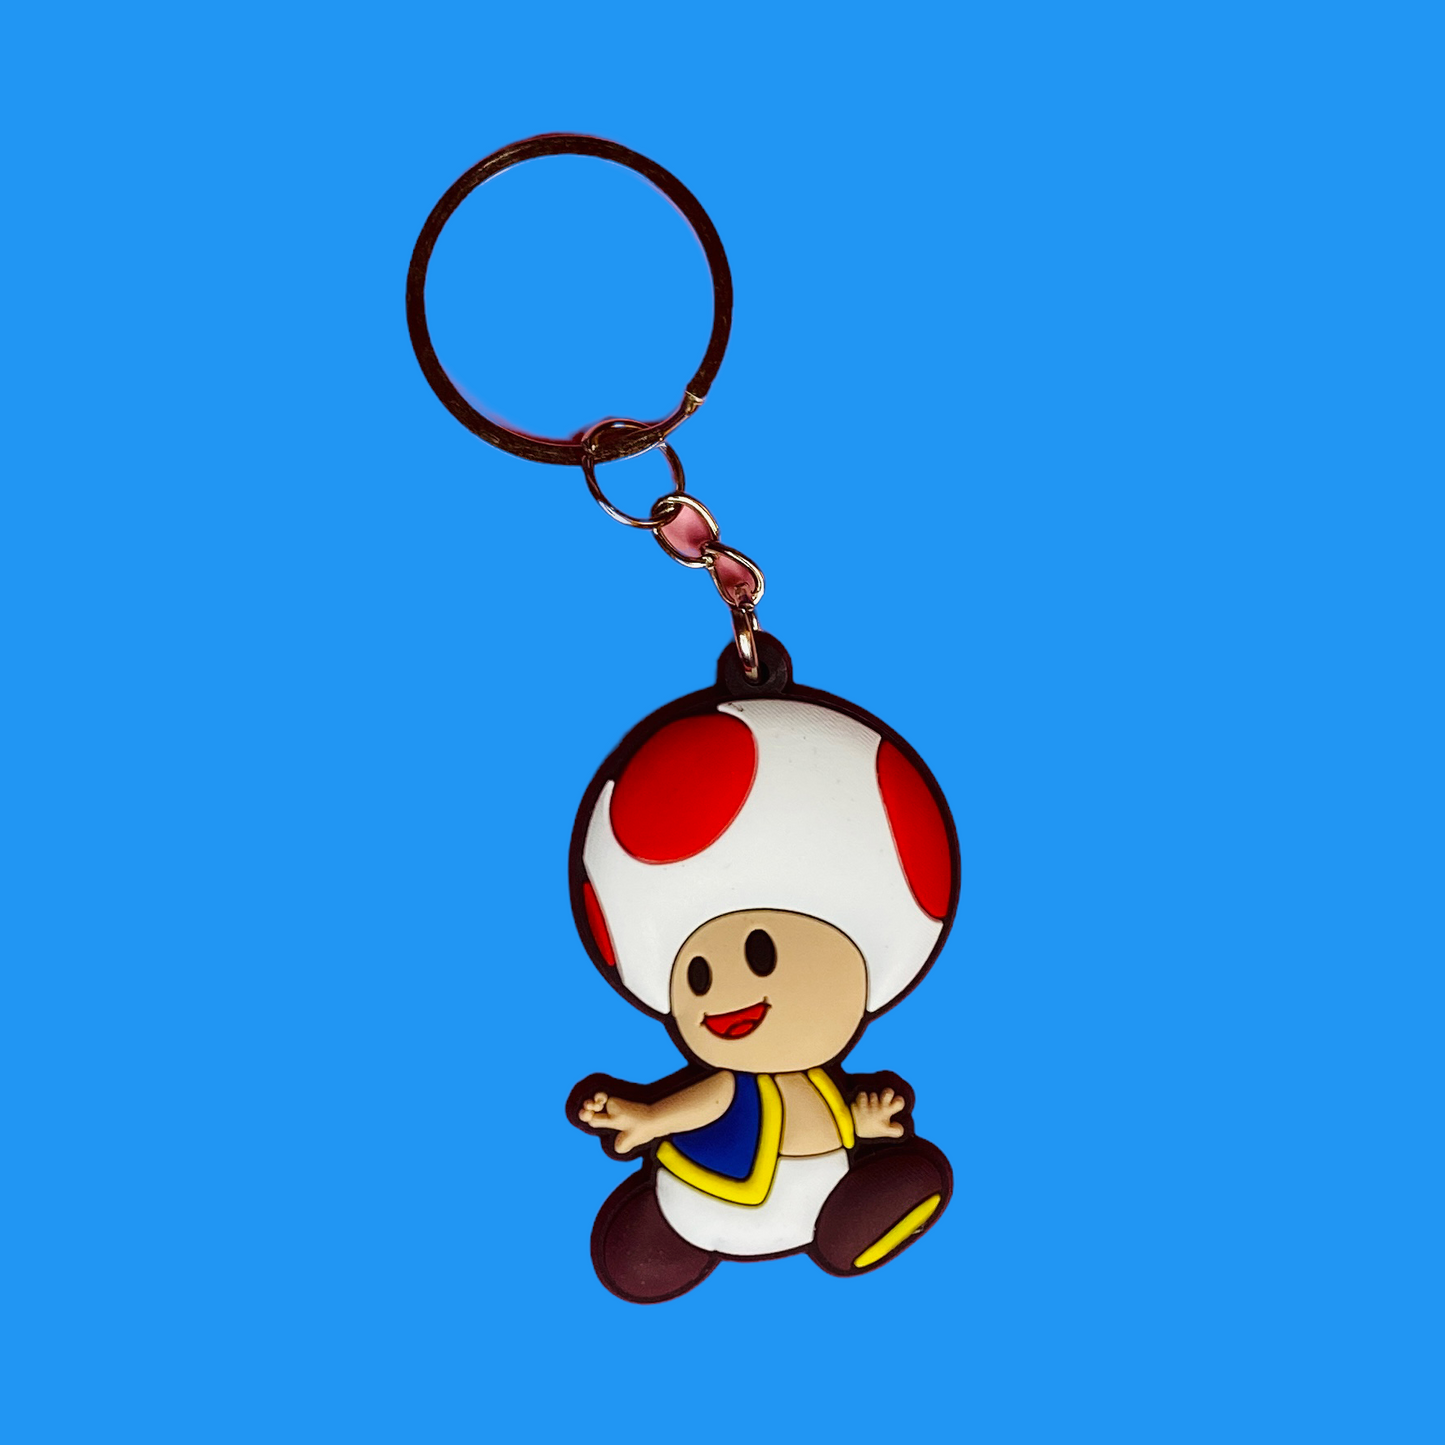 Toad Character Rubber Keychain Charm Keychains Pink Sweetheart